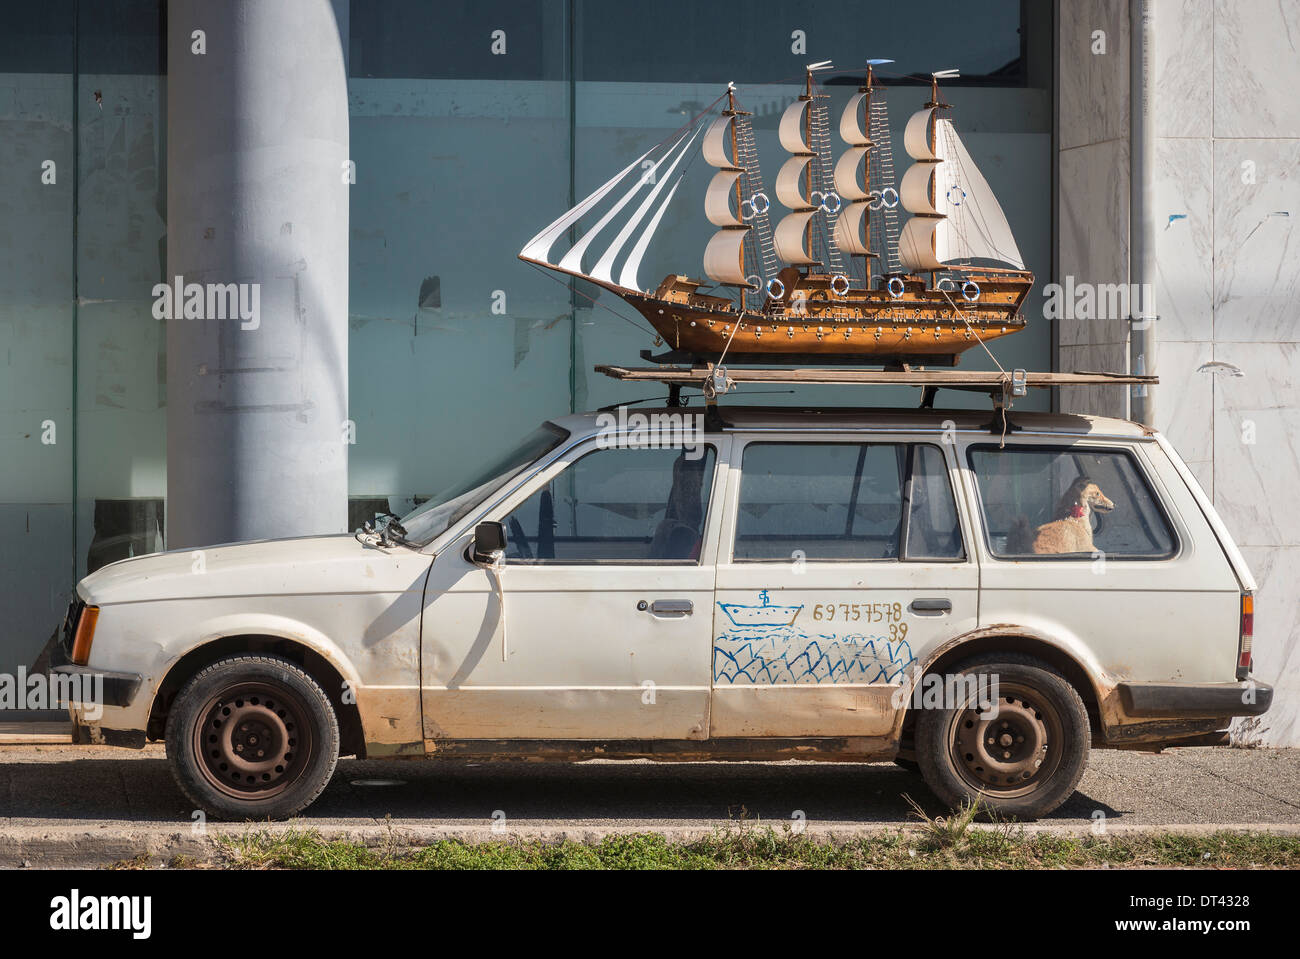 Model sailing ship for sale atop a car in the town of Kalamata, Messenia, Peloponnese, Greece Stock Photo